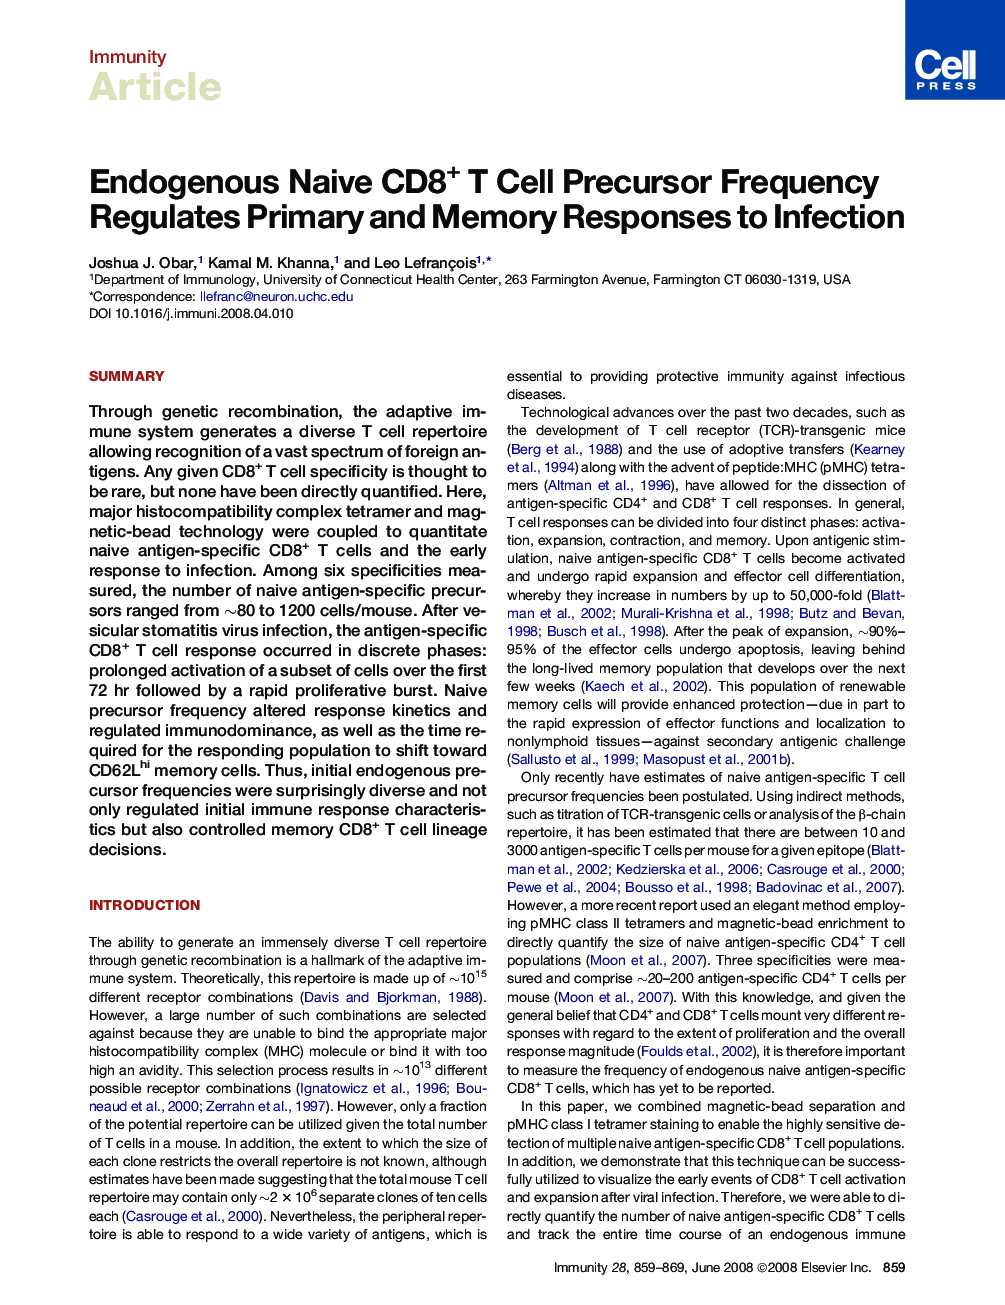 Endogenous Naive CD8+ T Cell Precursor Frequency Regulates Primary and Memory Responses to Infection